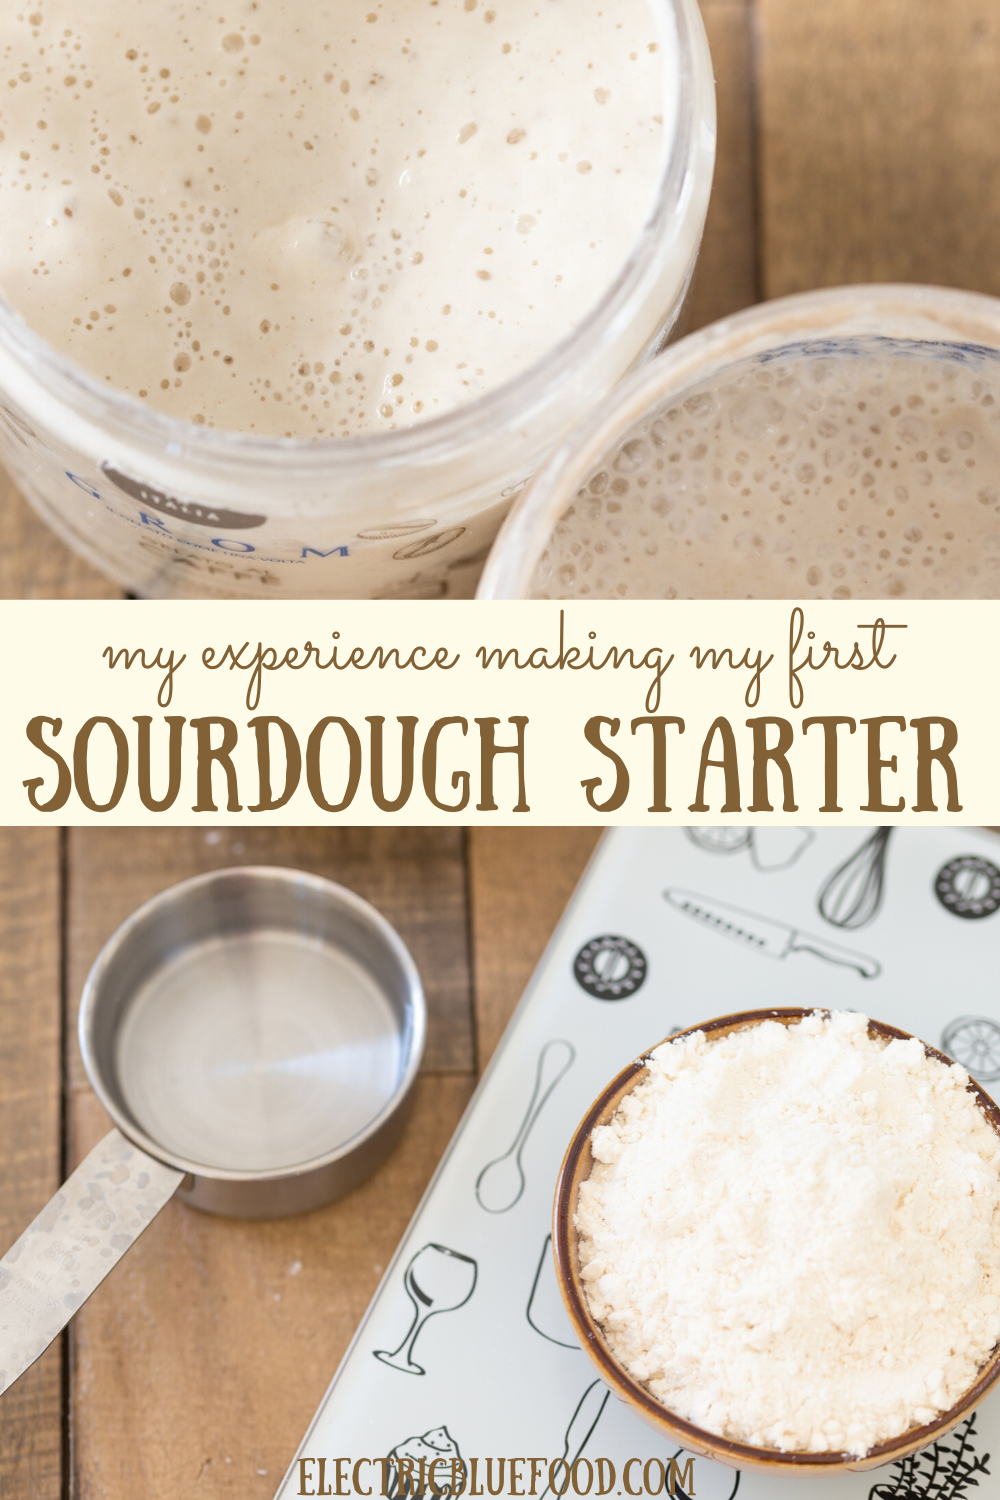 Make your first sourdough starter: it's easier than you'd think. Read my sourdough starter for dummies, aka my experience making my first sourdough.